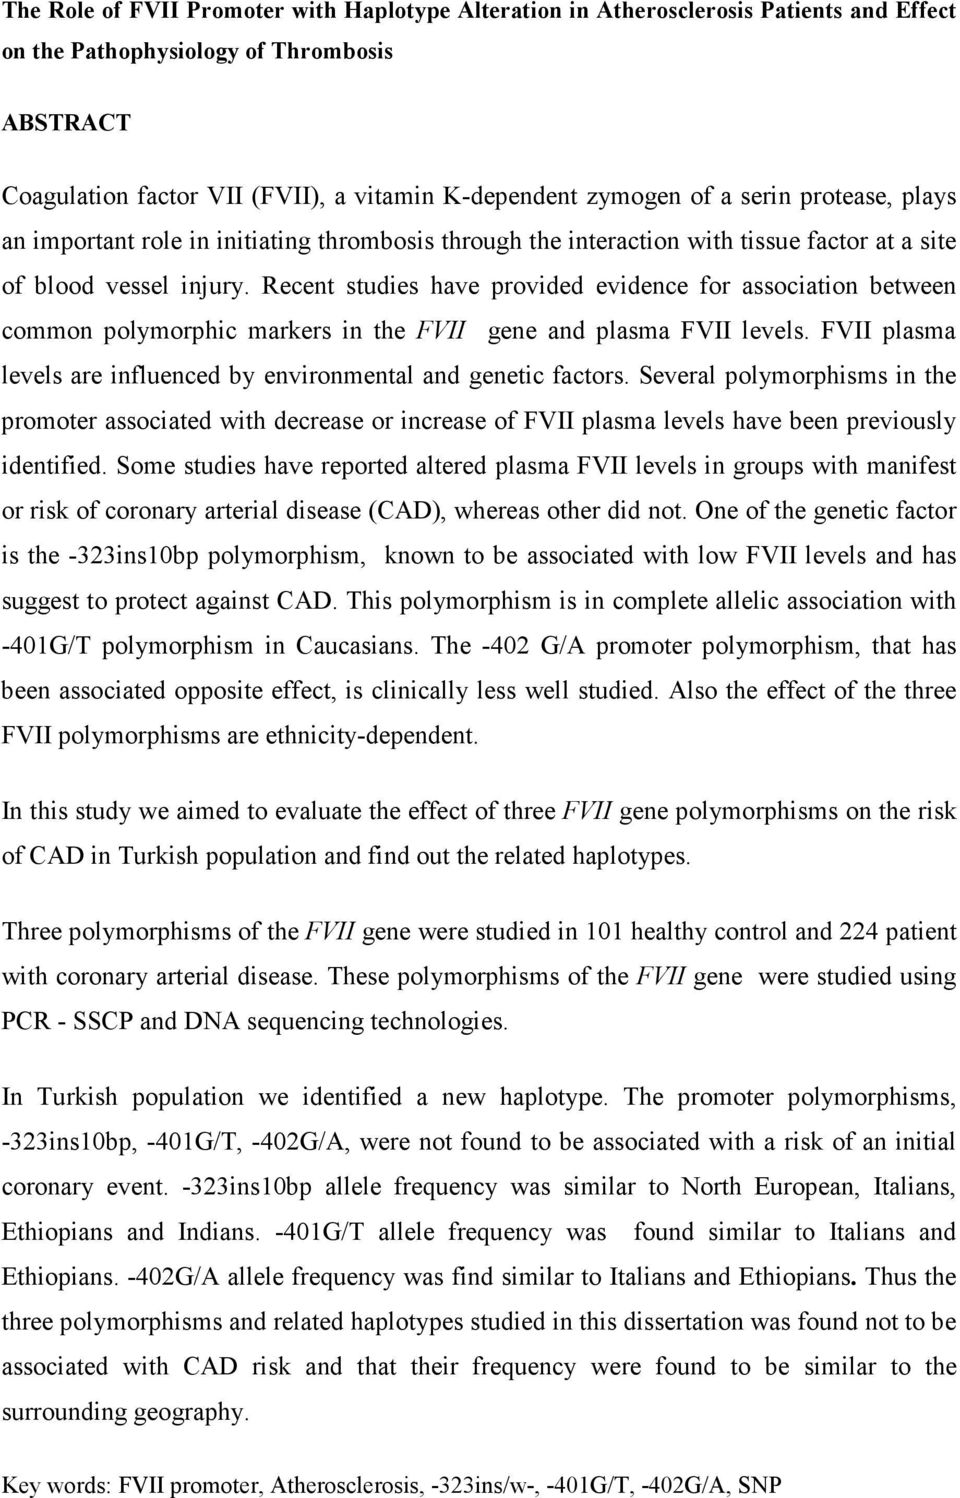 Recent studies have provided evidence for association between common polymorphic markers in the FVII gene and plasma FVII levels.